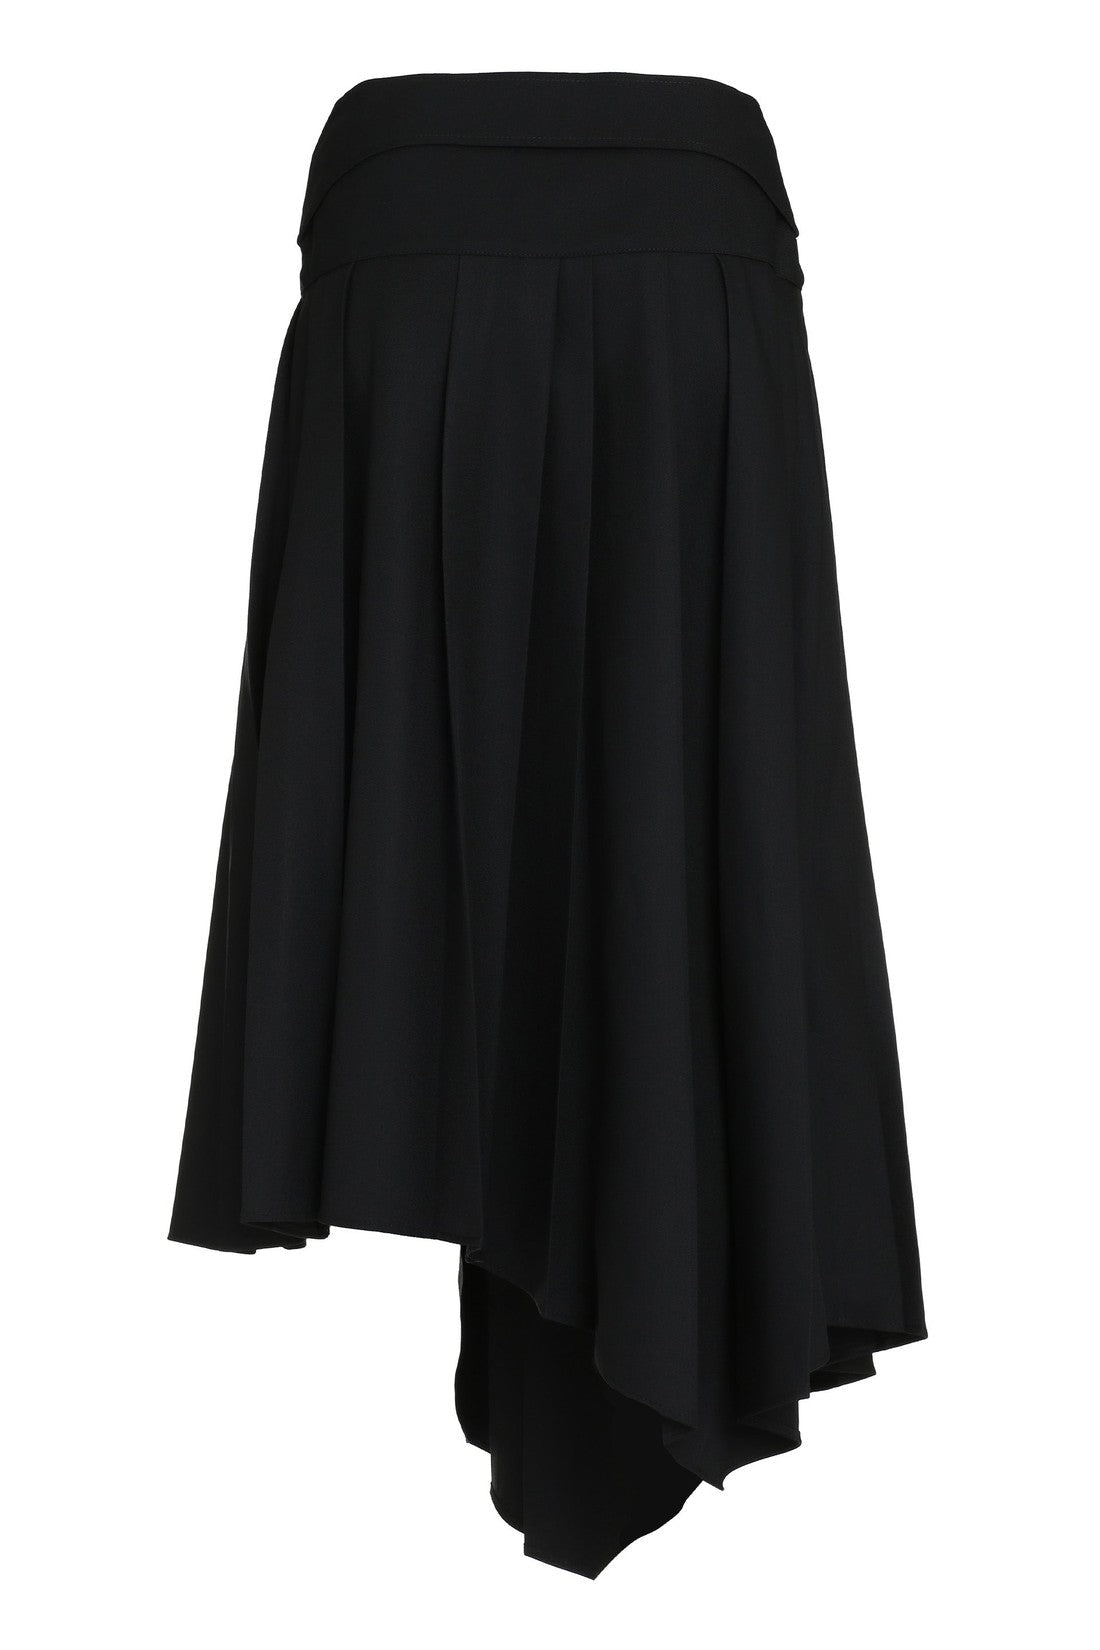 Off-White-OUTLET-SALE-Pleated asymmetrical skirt-ARCHIVIST